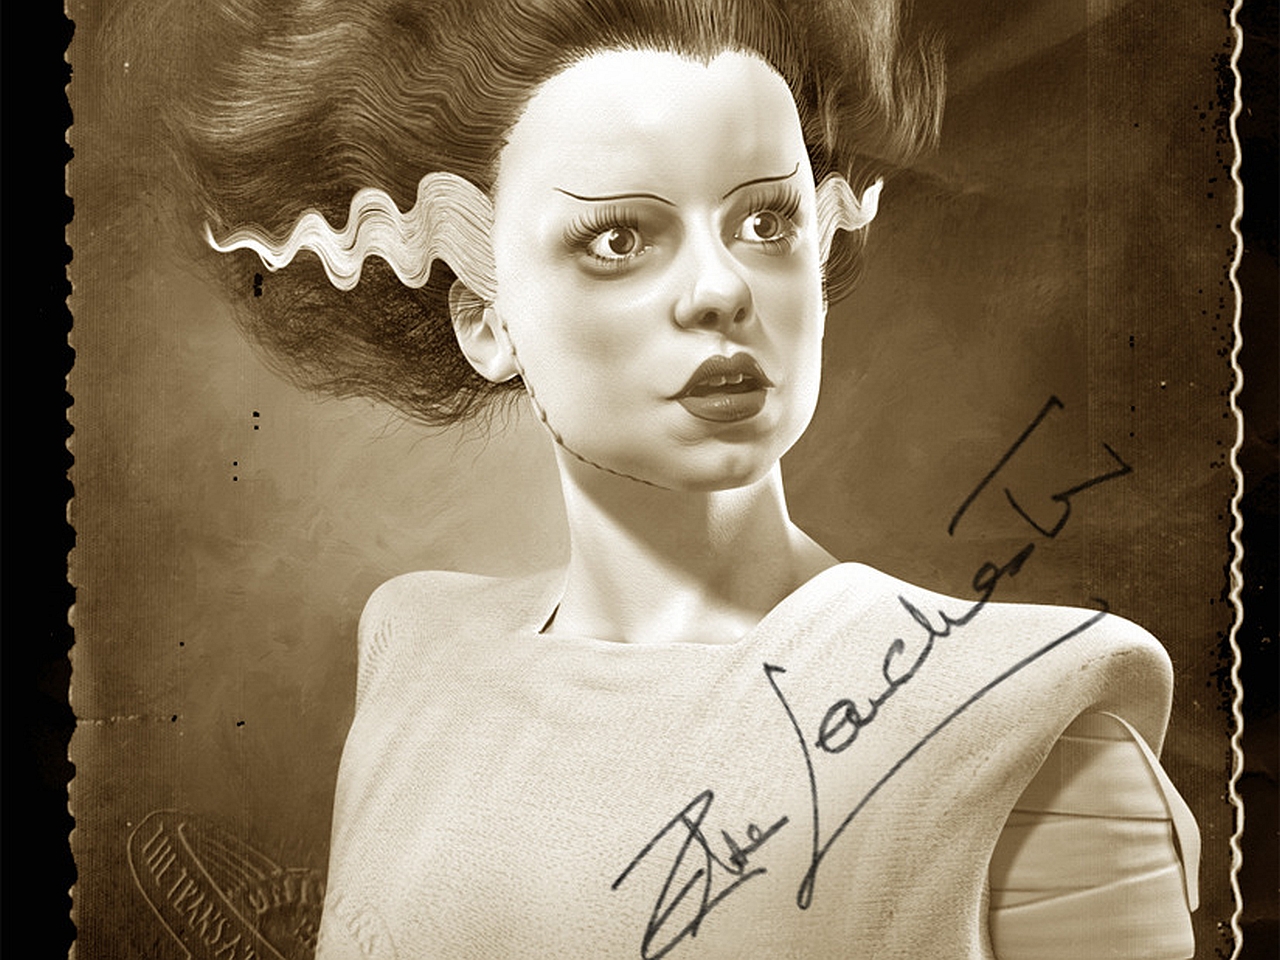 The Bride of Frankenstein Image - ID: 375400 - Image Abyss.